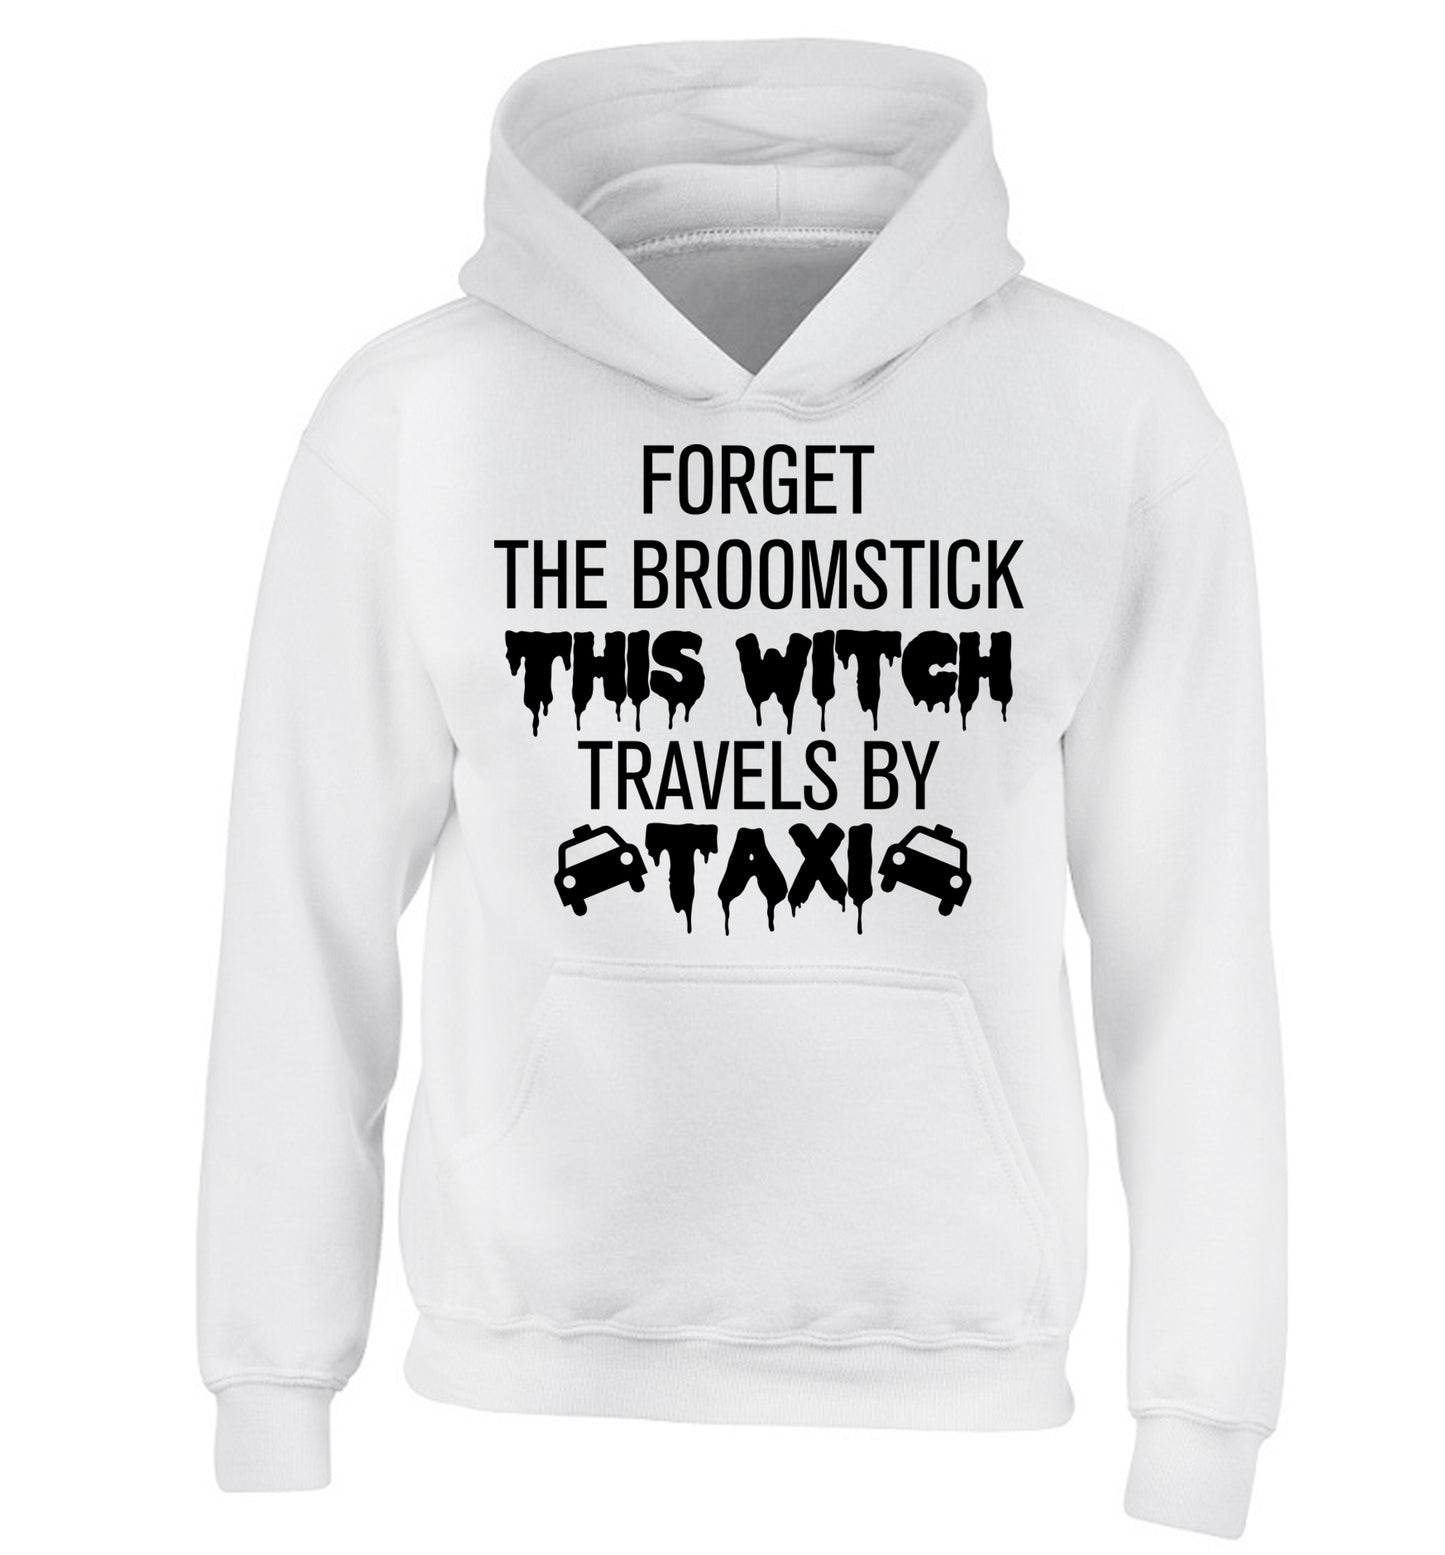 Forget the broomstick this witch travels by taxi children's white hoodie 12-14 Years